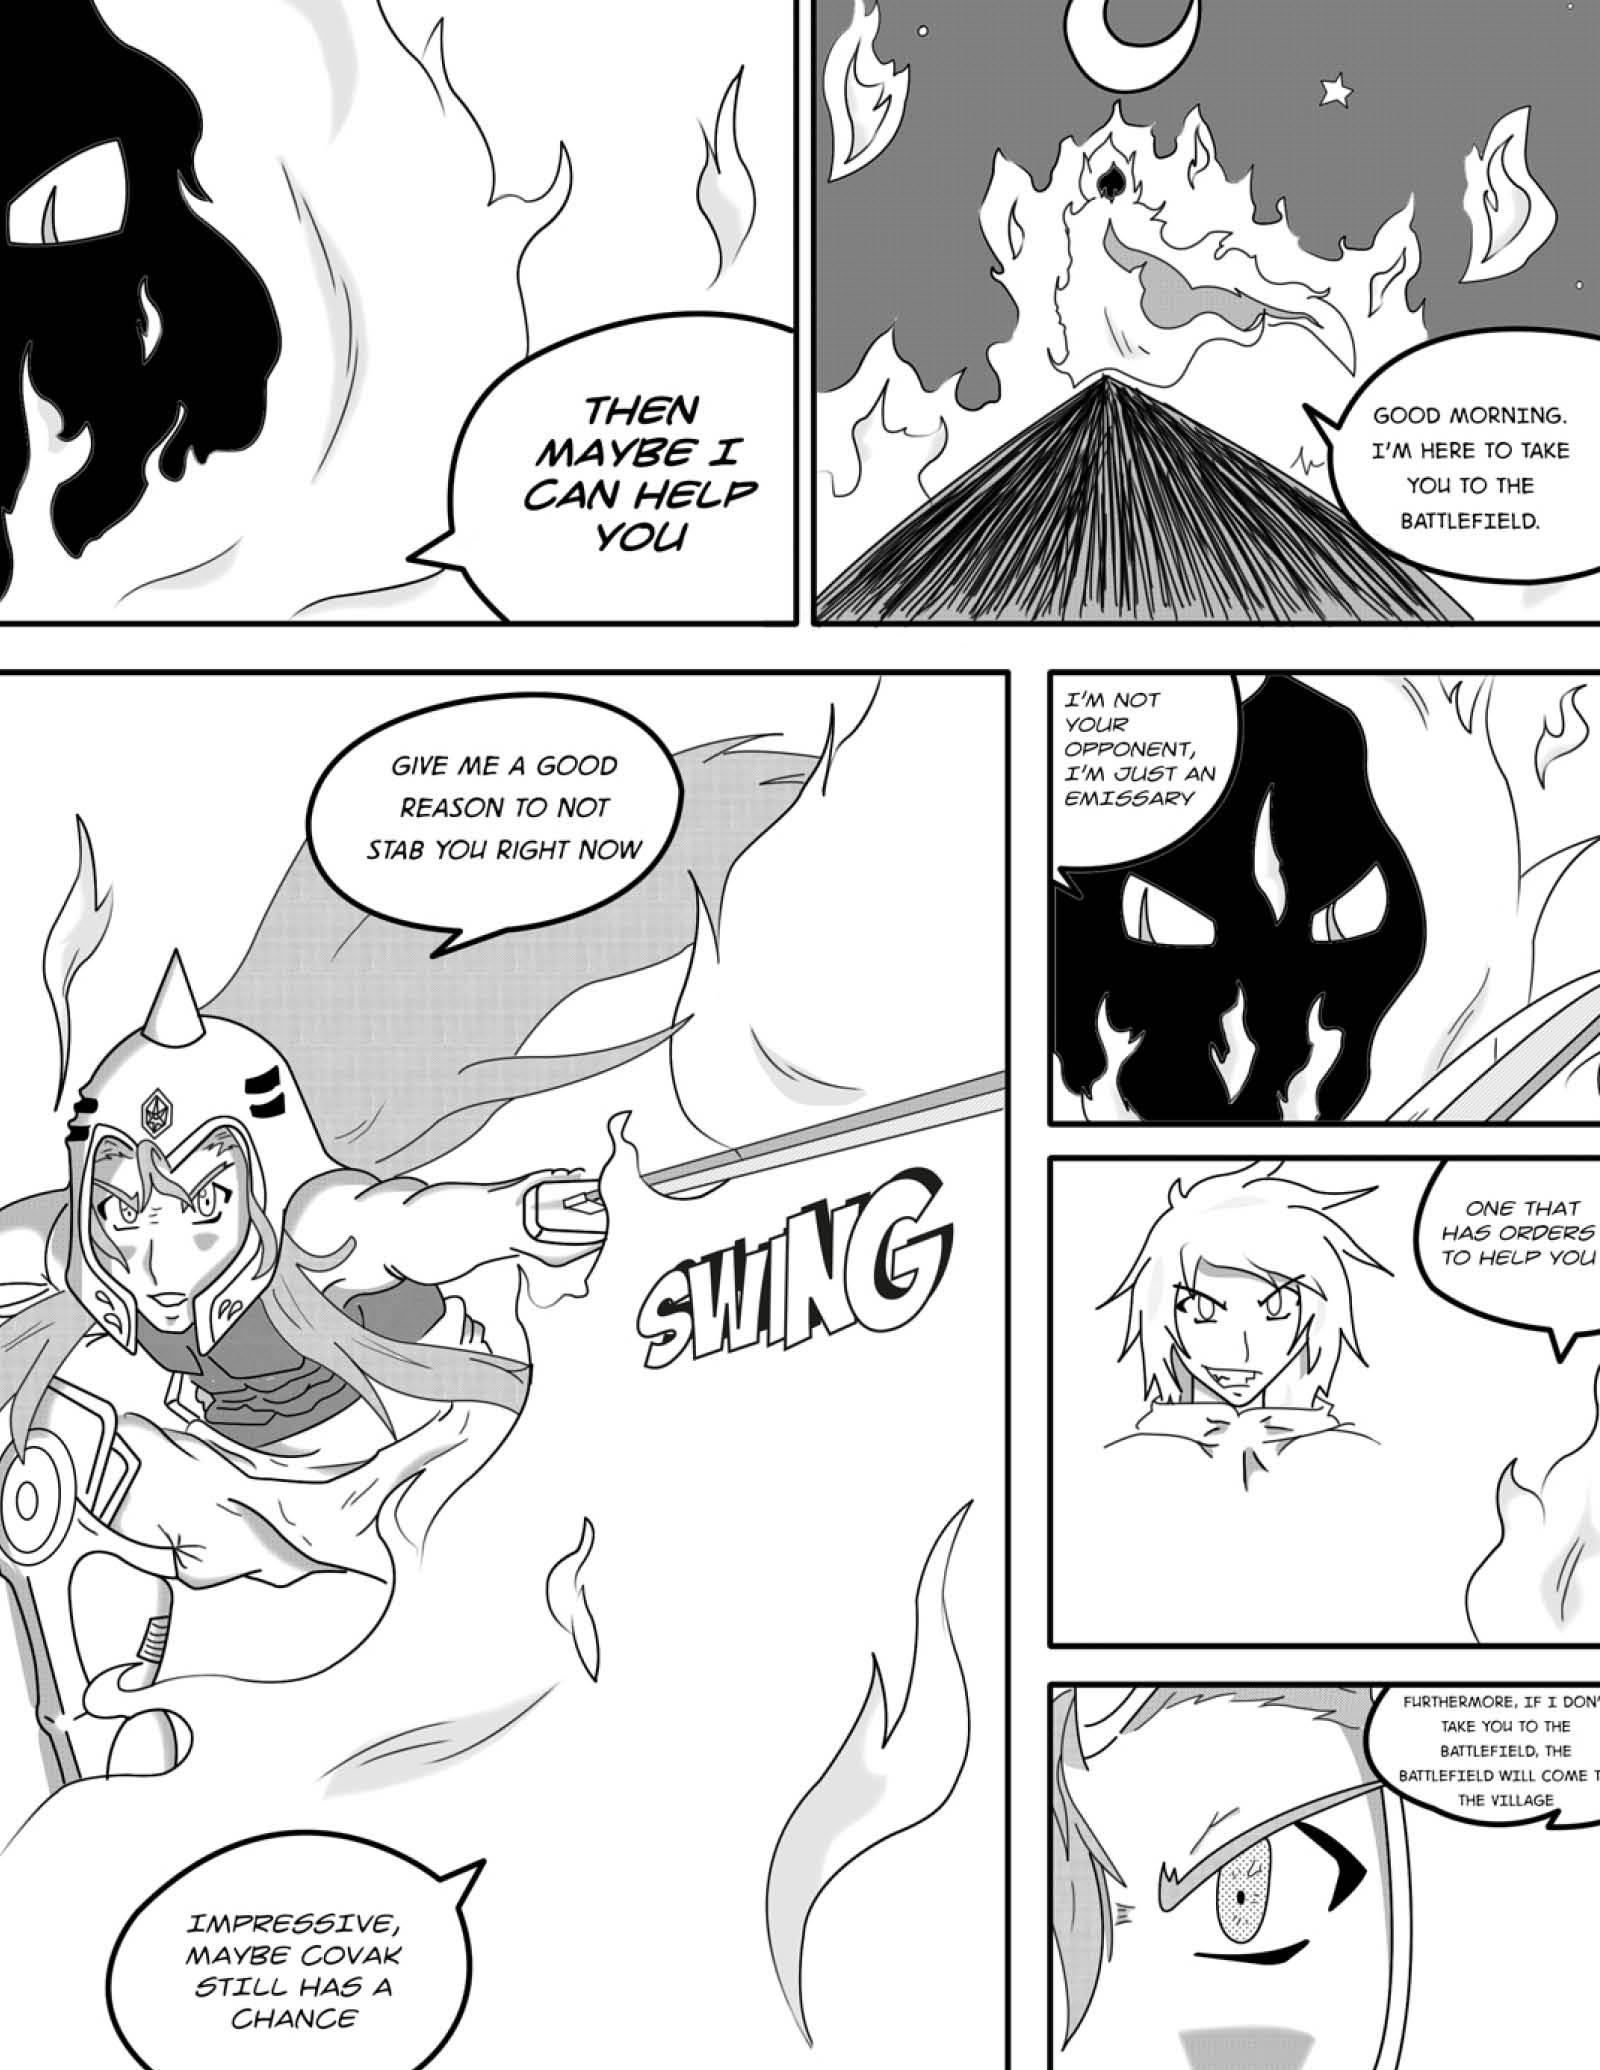 Series Dilan: the Chronicles of Covak - Chapter 1 - Page 41 - Language ENG